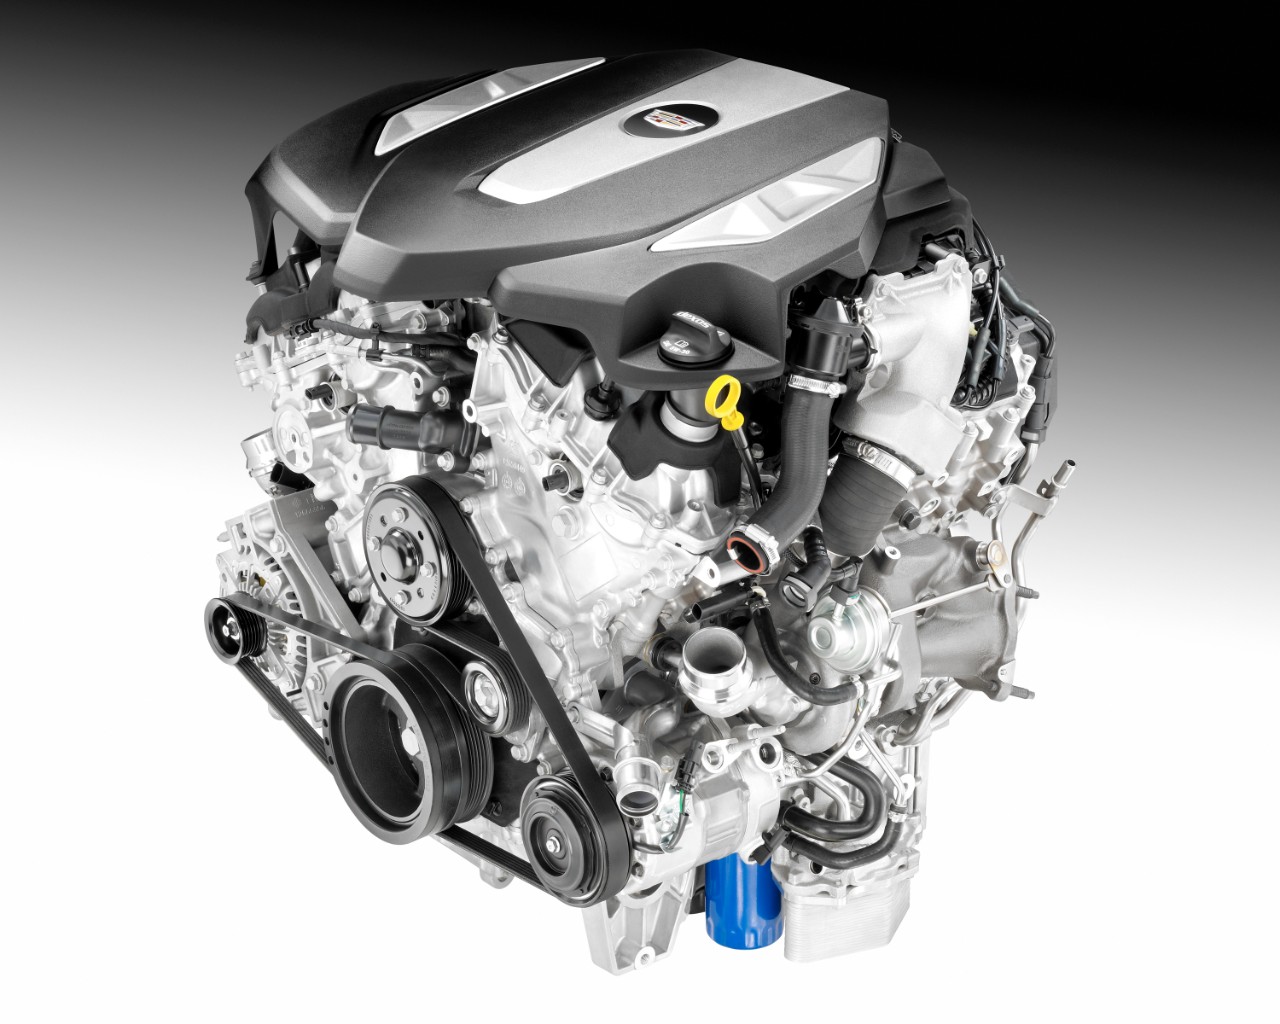 The all-new 3.0L Twin Turbo for the 2016 Cadillac CT6